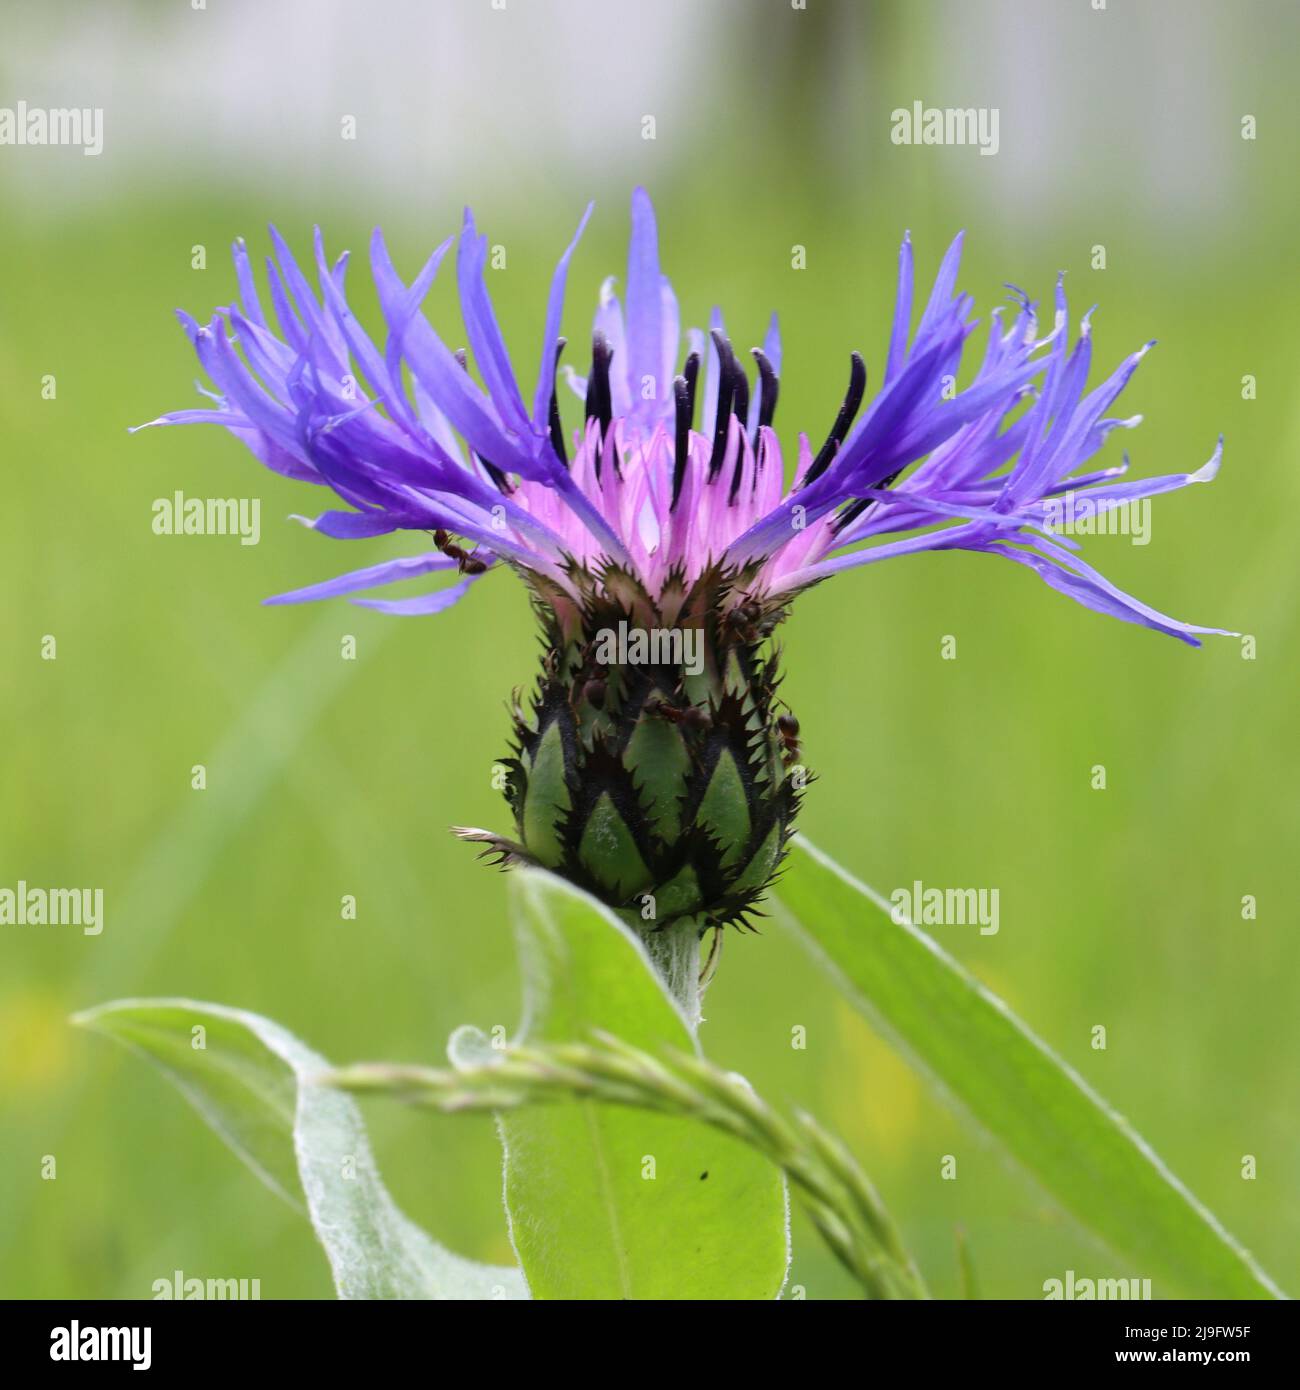 close-up of a blue flower head of a centaurea montana against a green blurred background Stock Photo